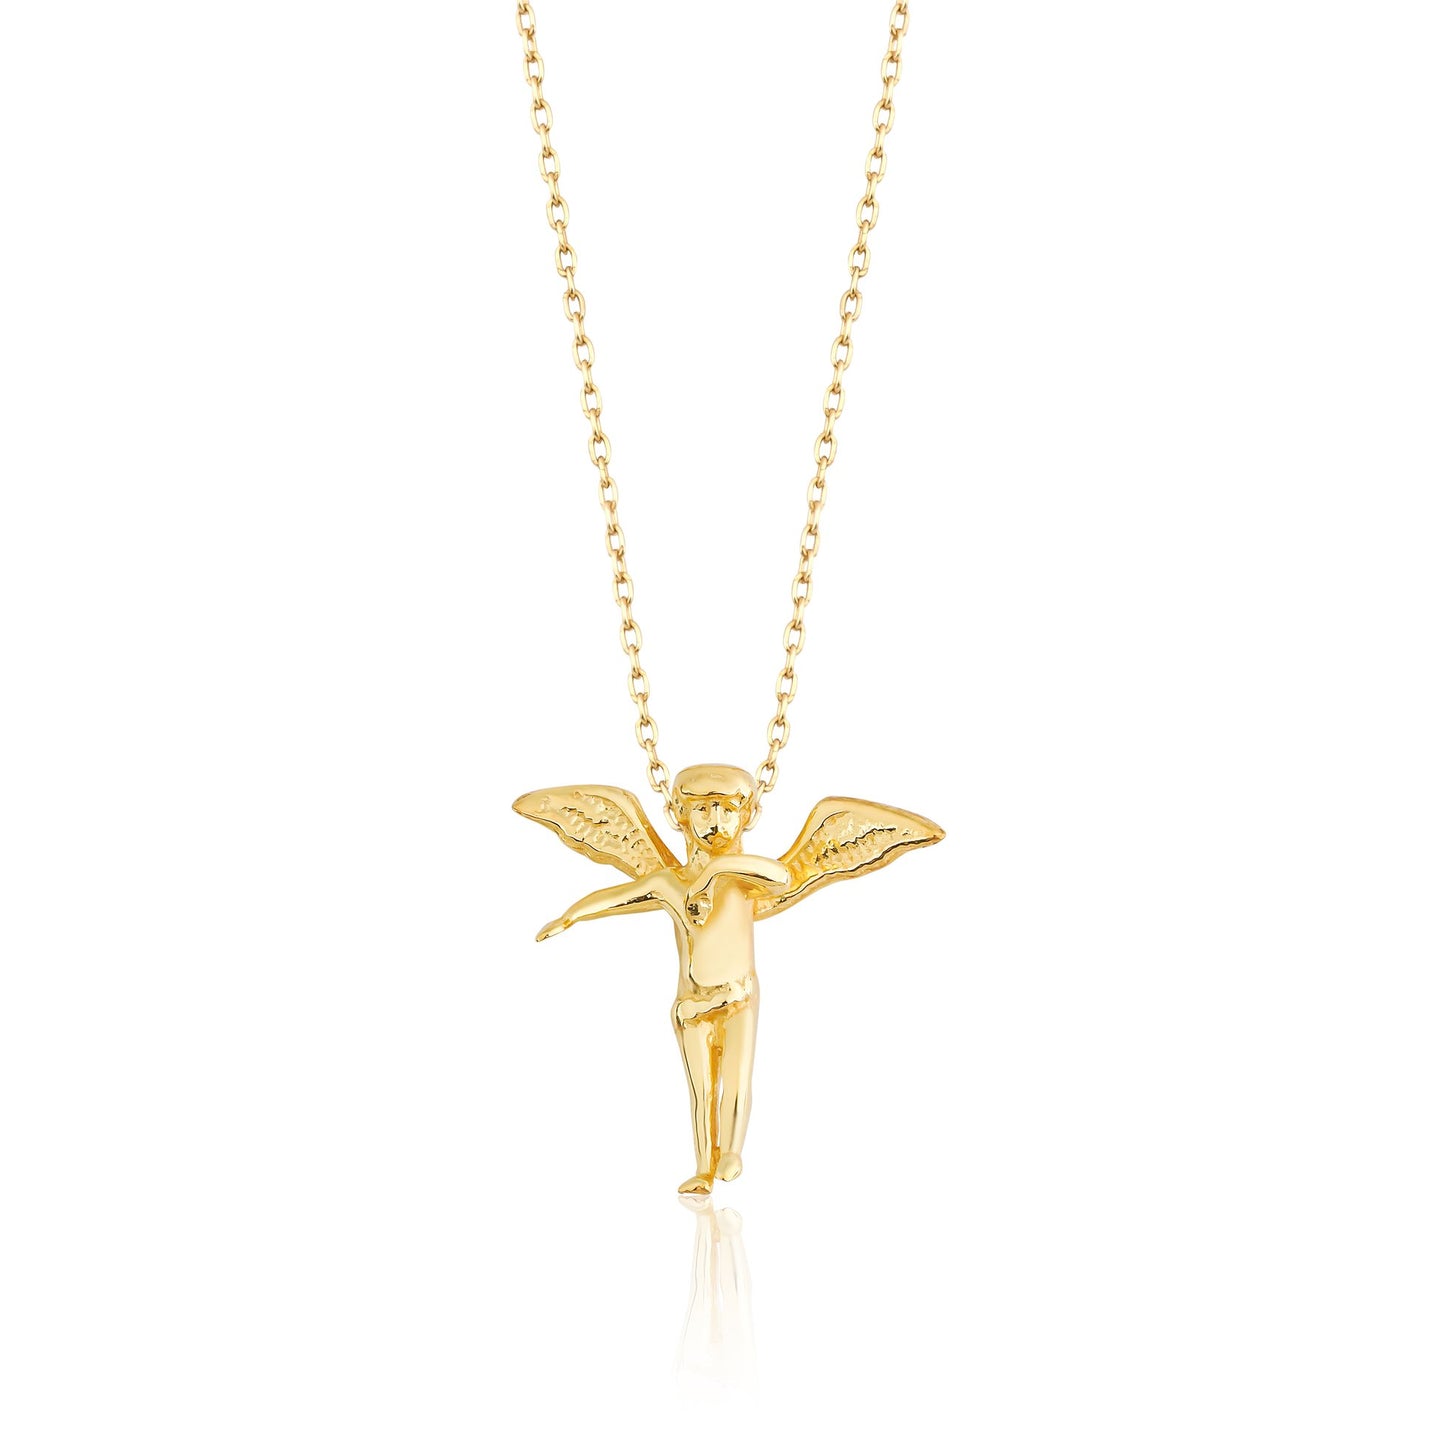 Three-dimensional Angel Silver Necklace